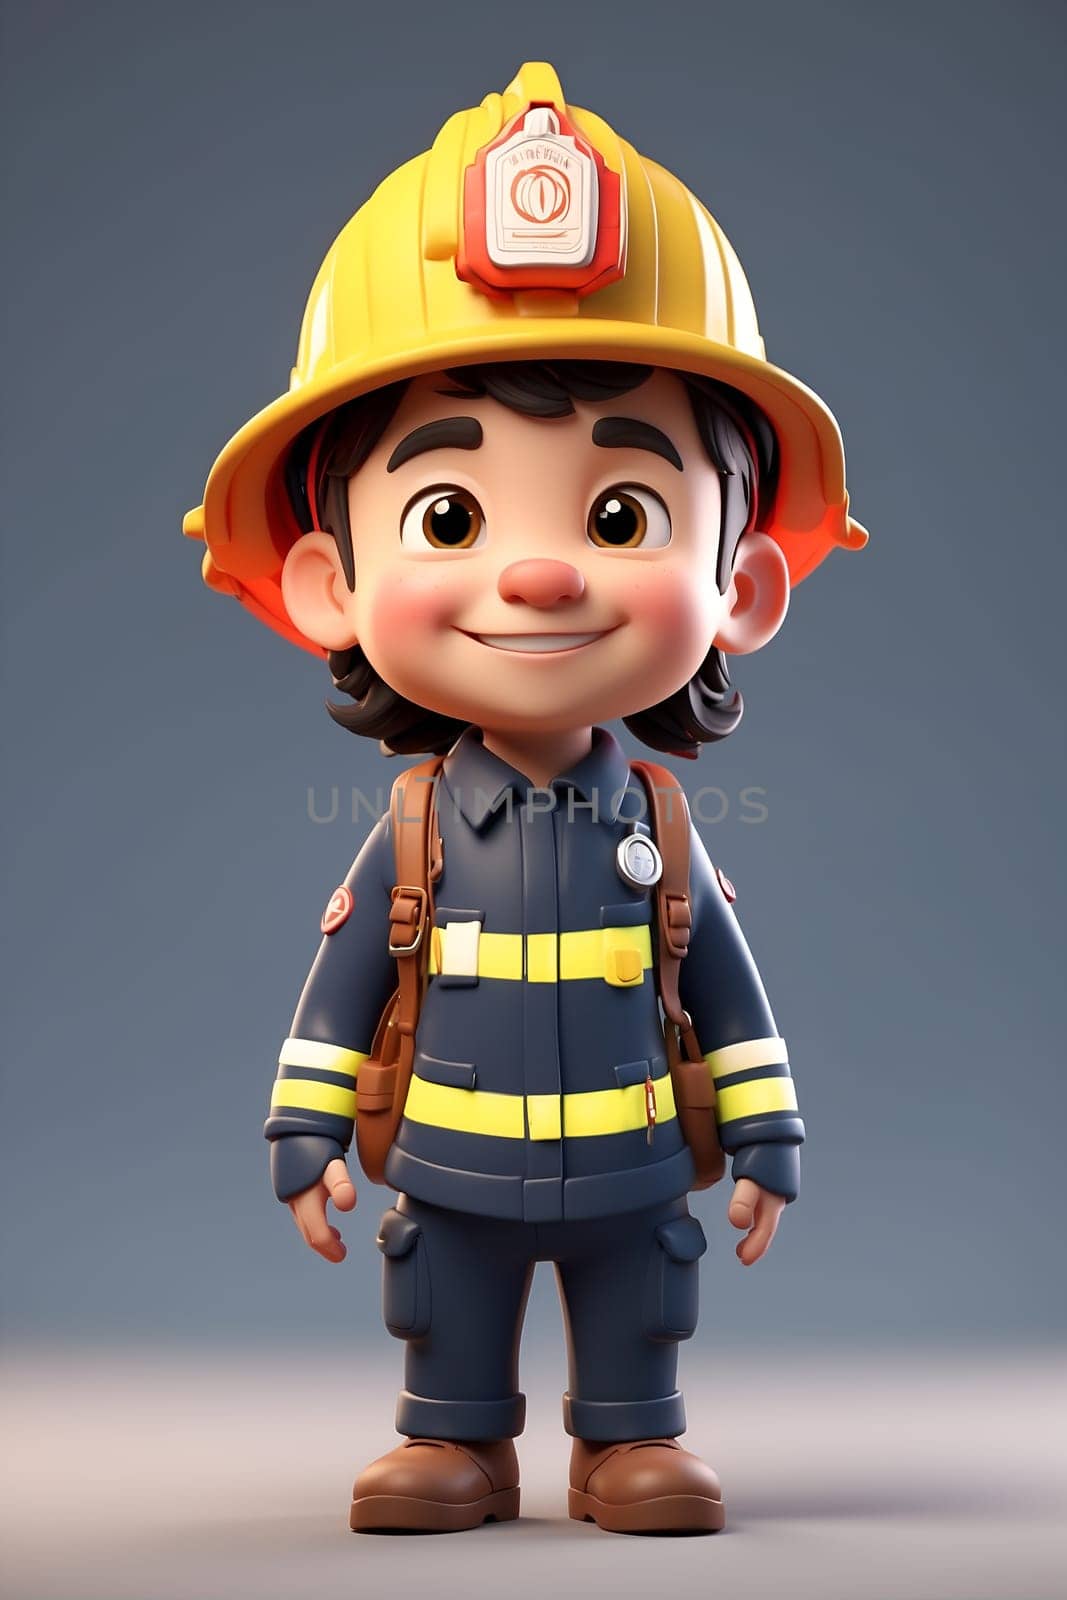 A cartoon character wearing a firemans helmet stands proudly, ready to fight fires and save the day.